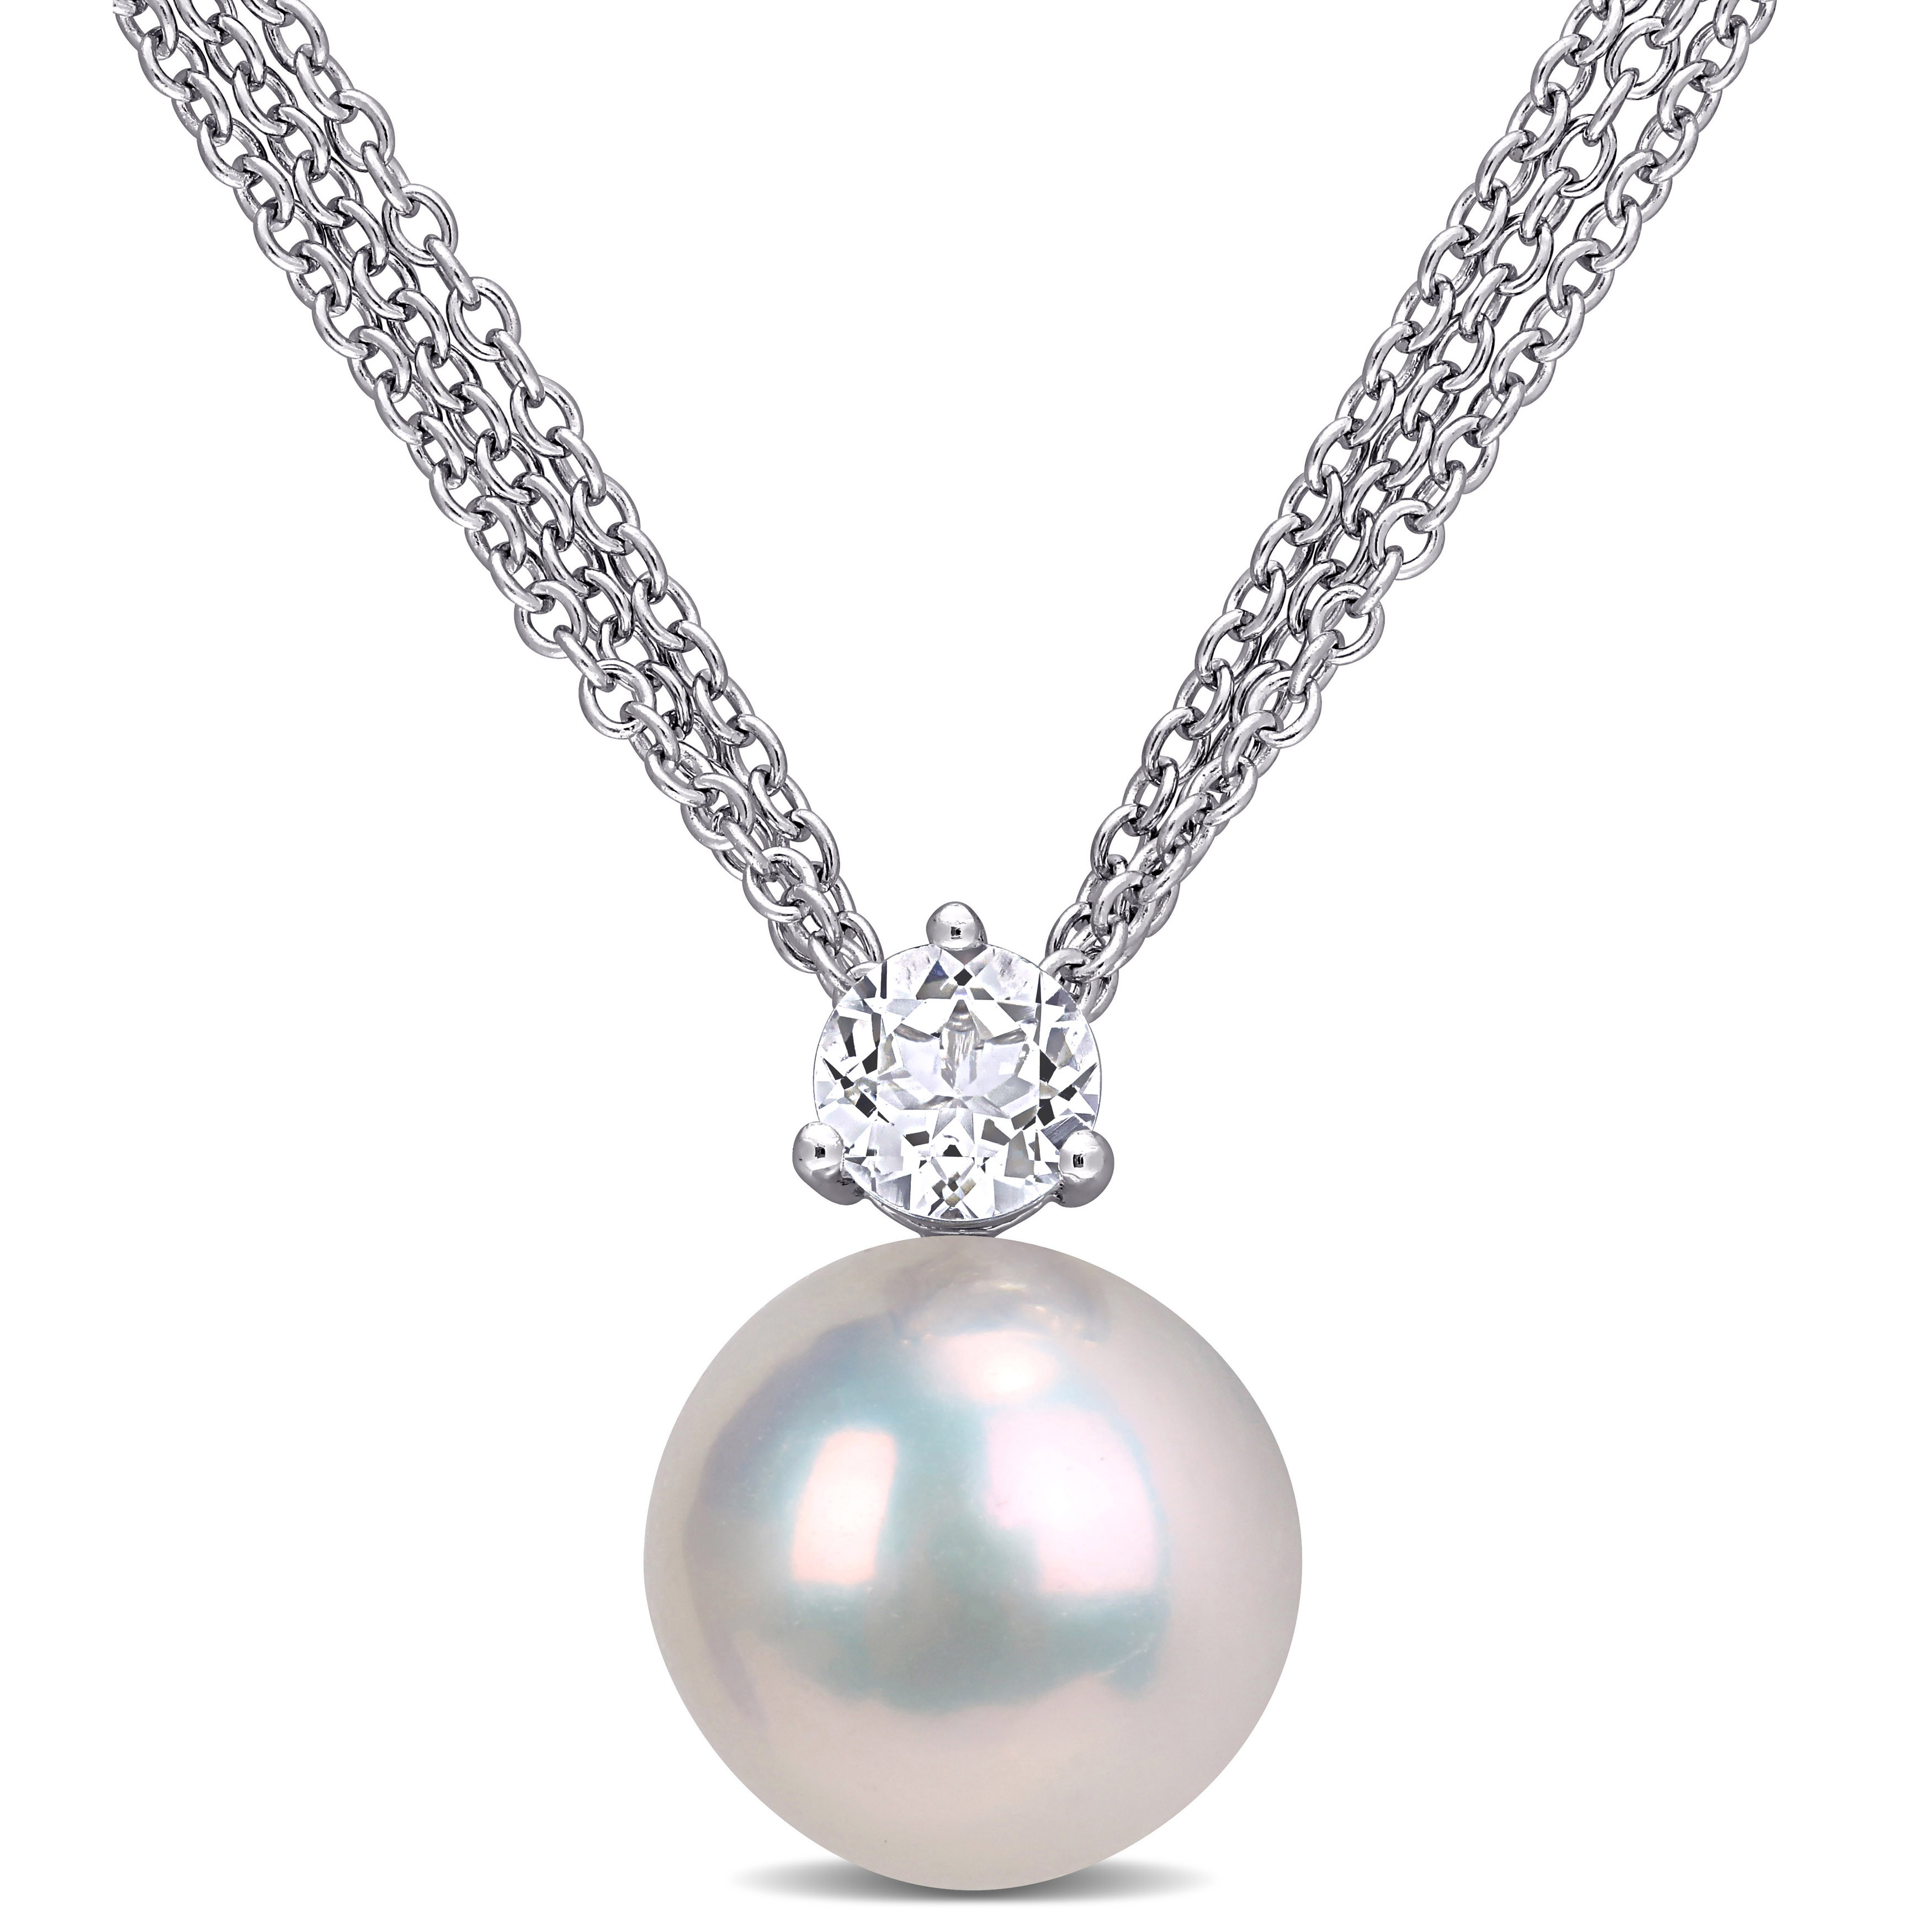 11-12 MM Cultured Freshwater Pearl and 5/8 CT TGW White Topaz Pendant with Chain in Sterling Silver